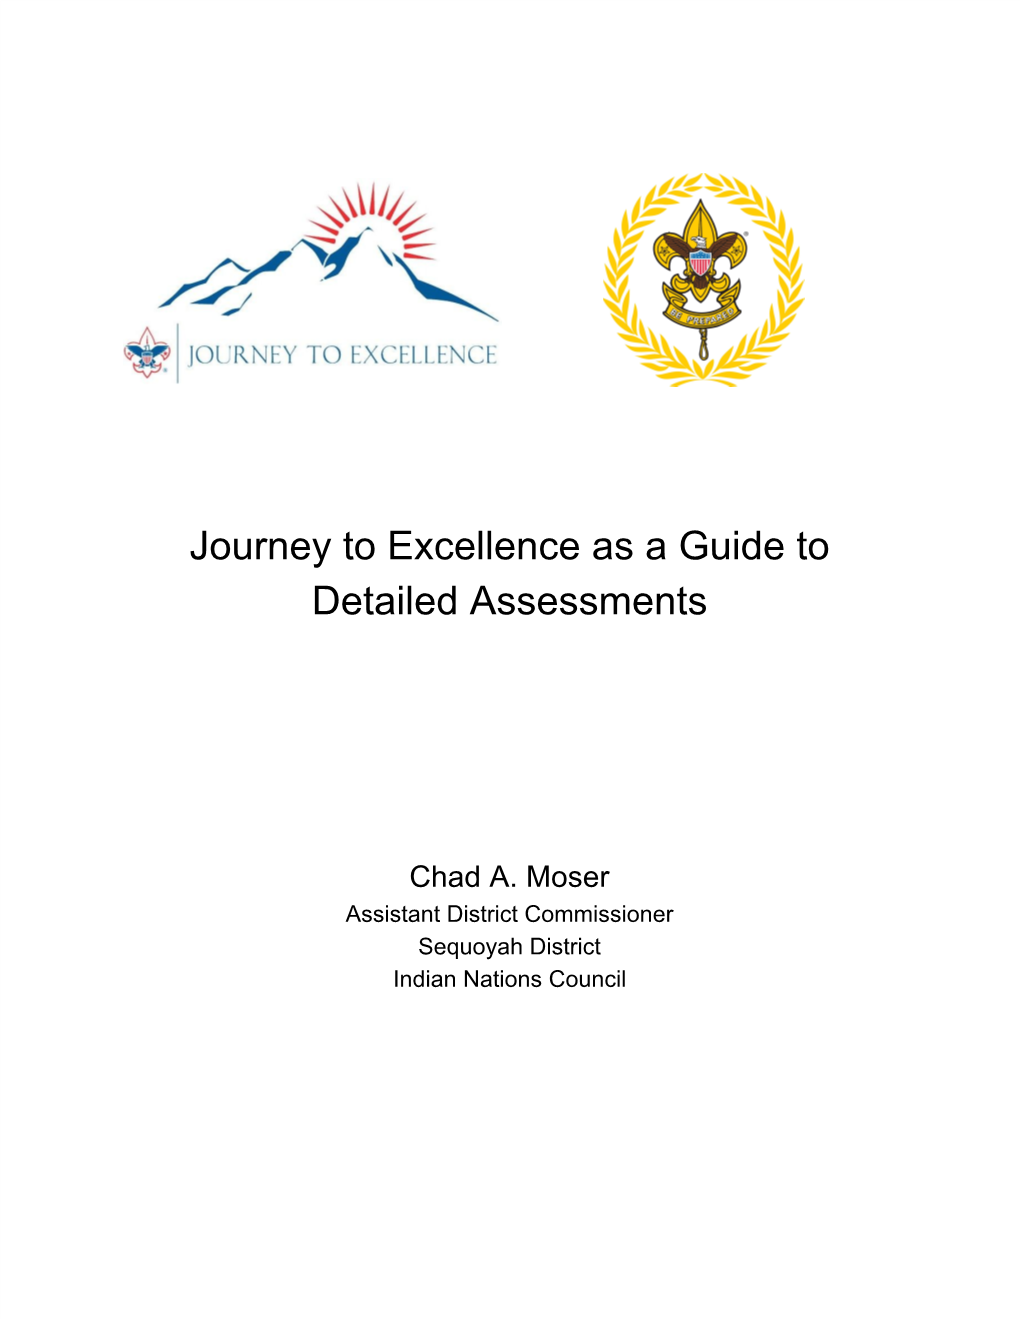 Journey to Excellence As a Guide to Detailed Assessments